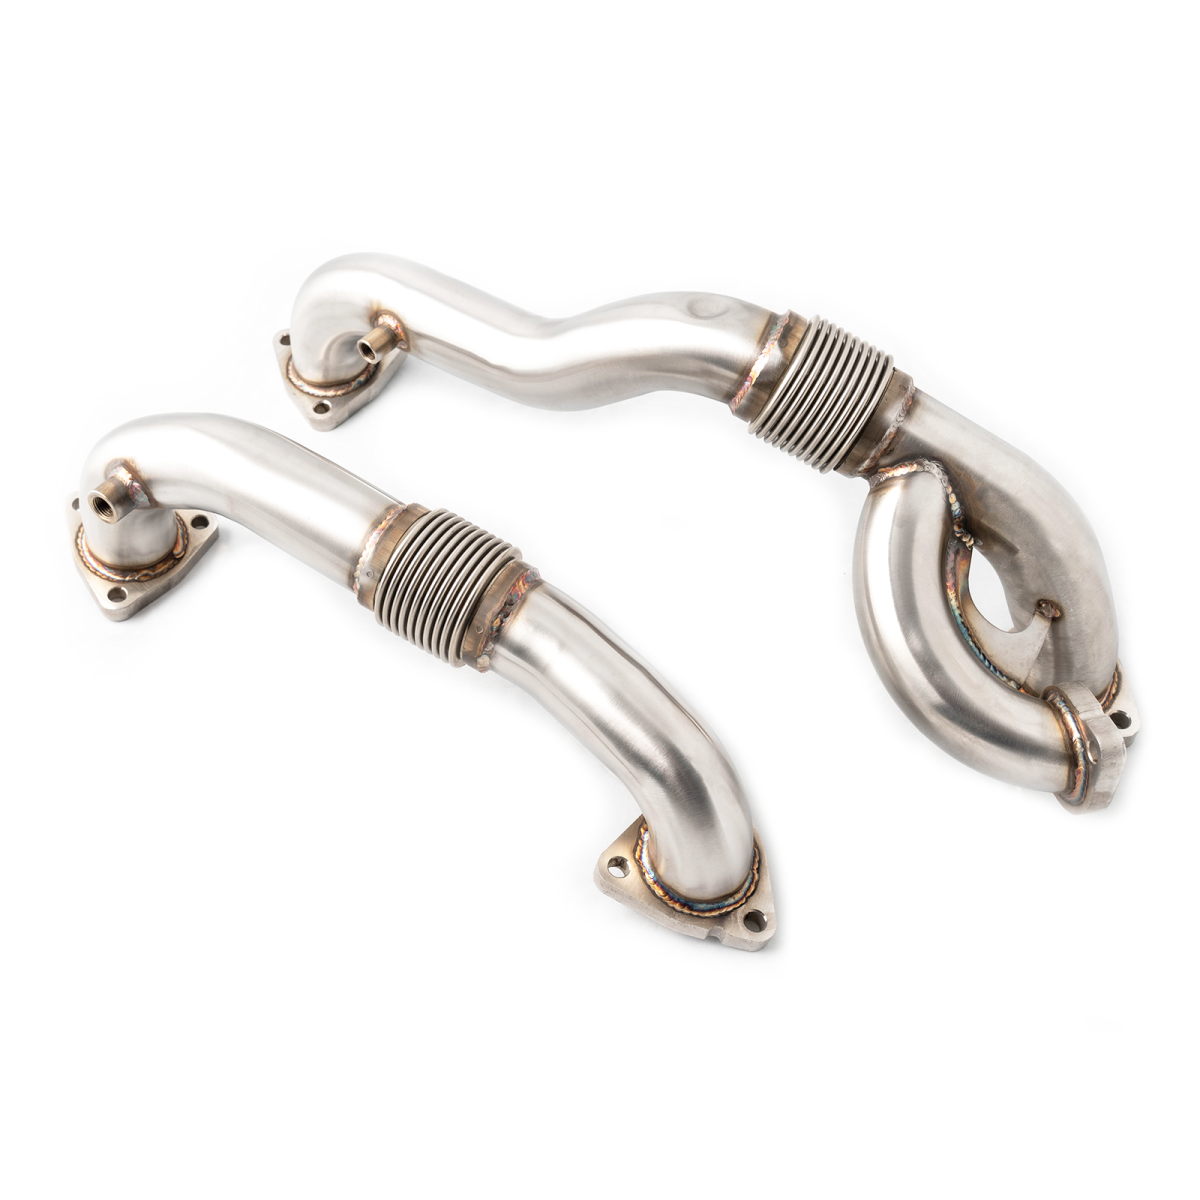 Rudy's Performance Parts - Rudy's Heavy Duty Thick Wall Stainless Up Pipes For 08-10 Ford 6.4L Powerstroke